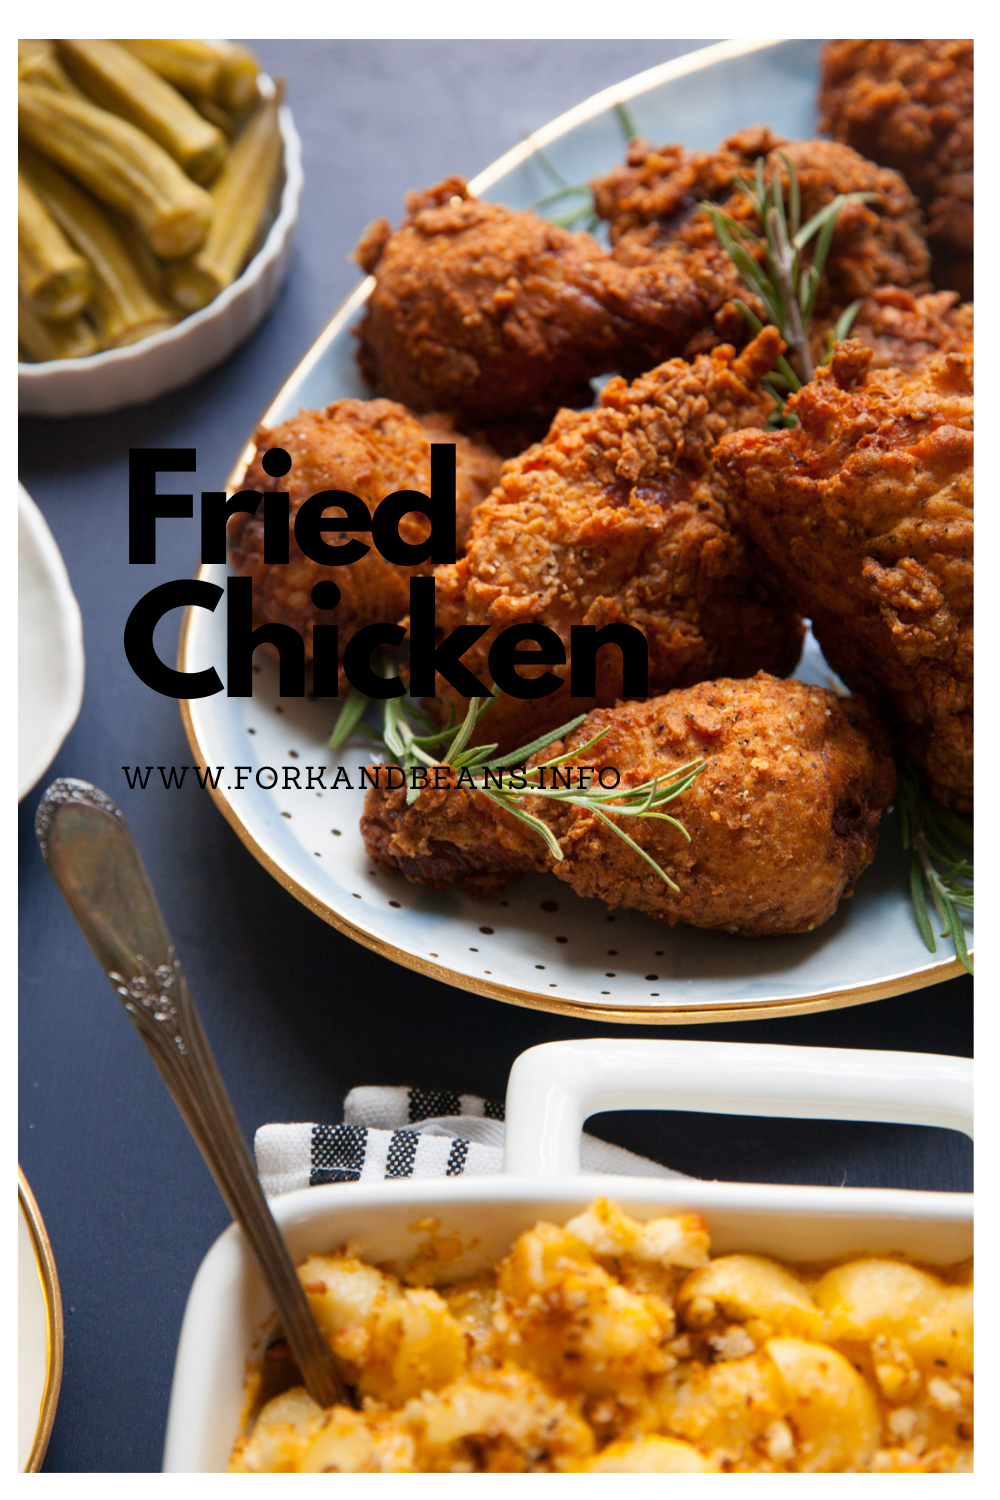 OVEN FRIED CHICKEN FOR THE CROWD